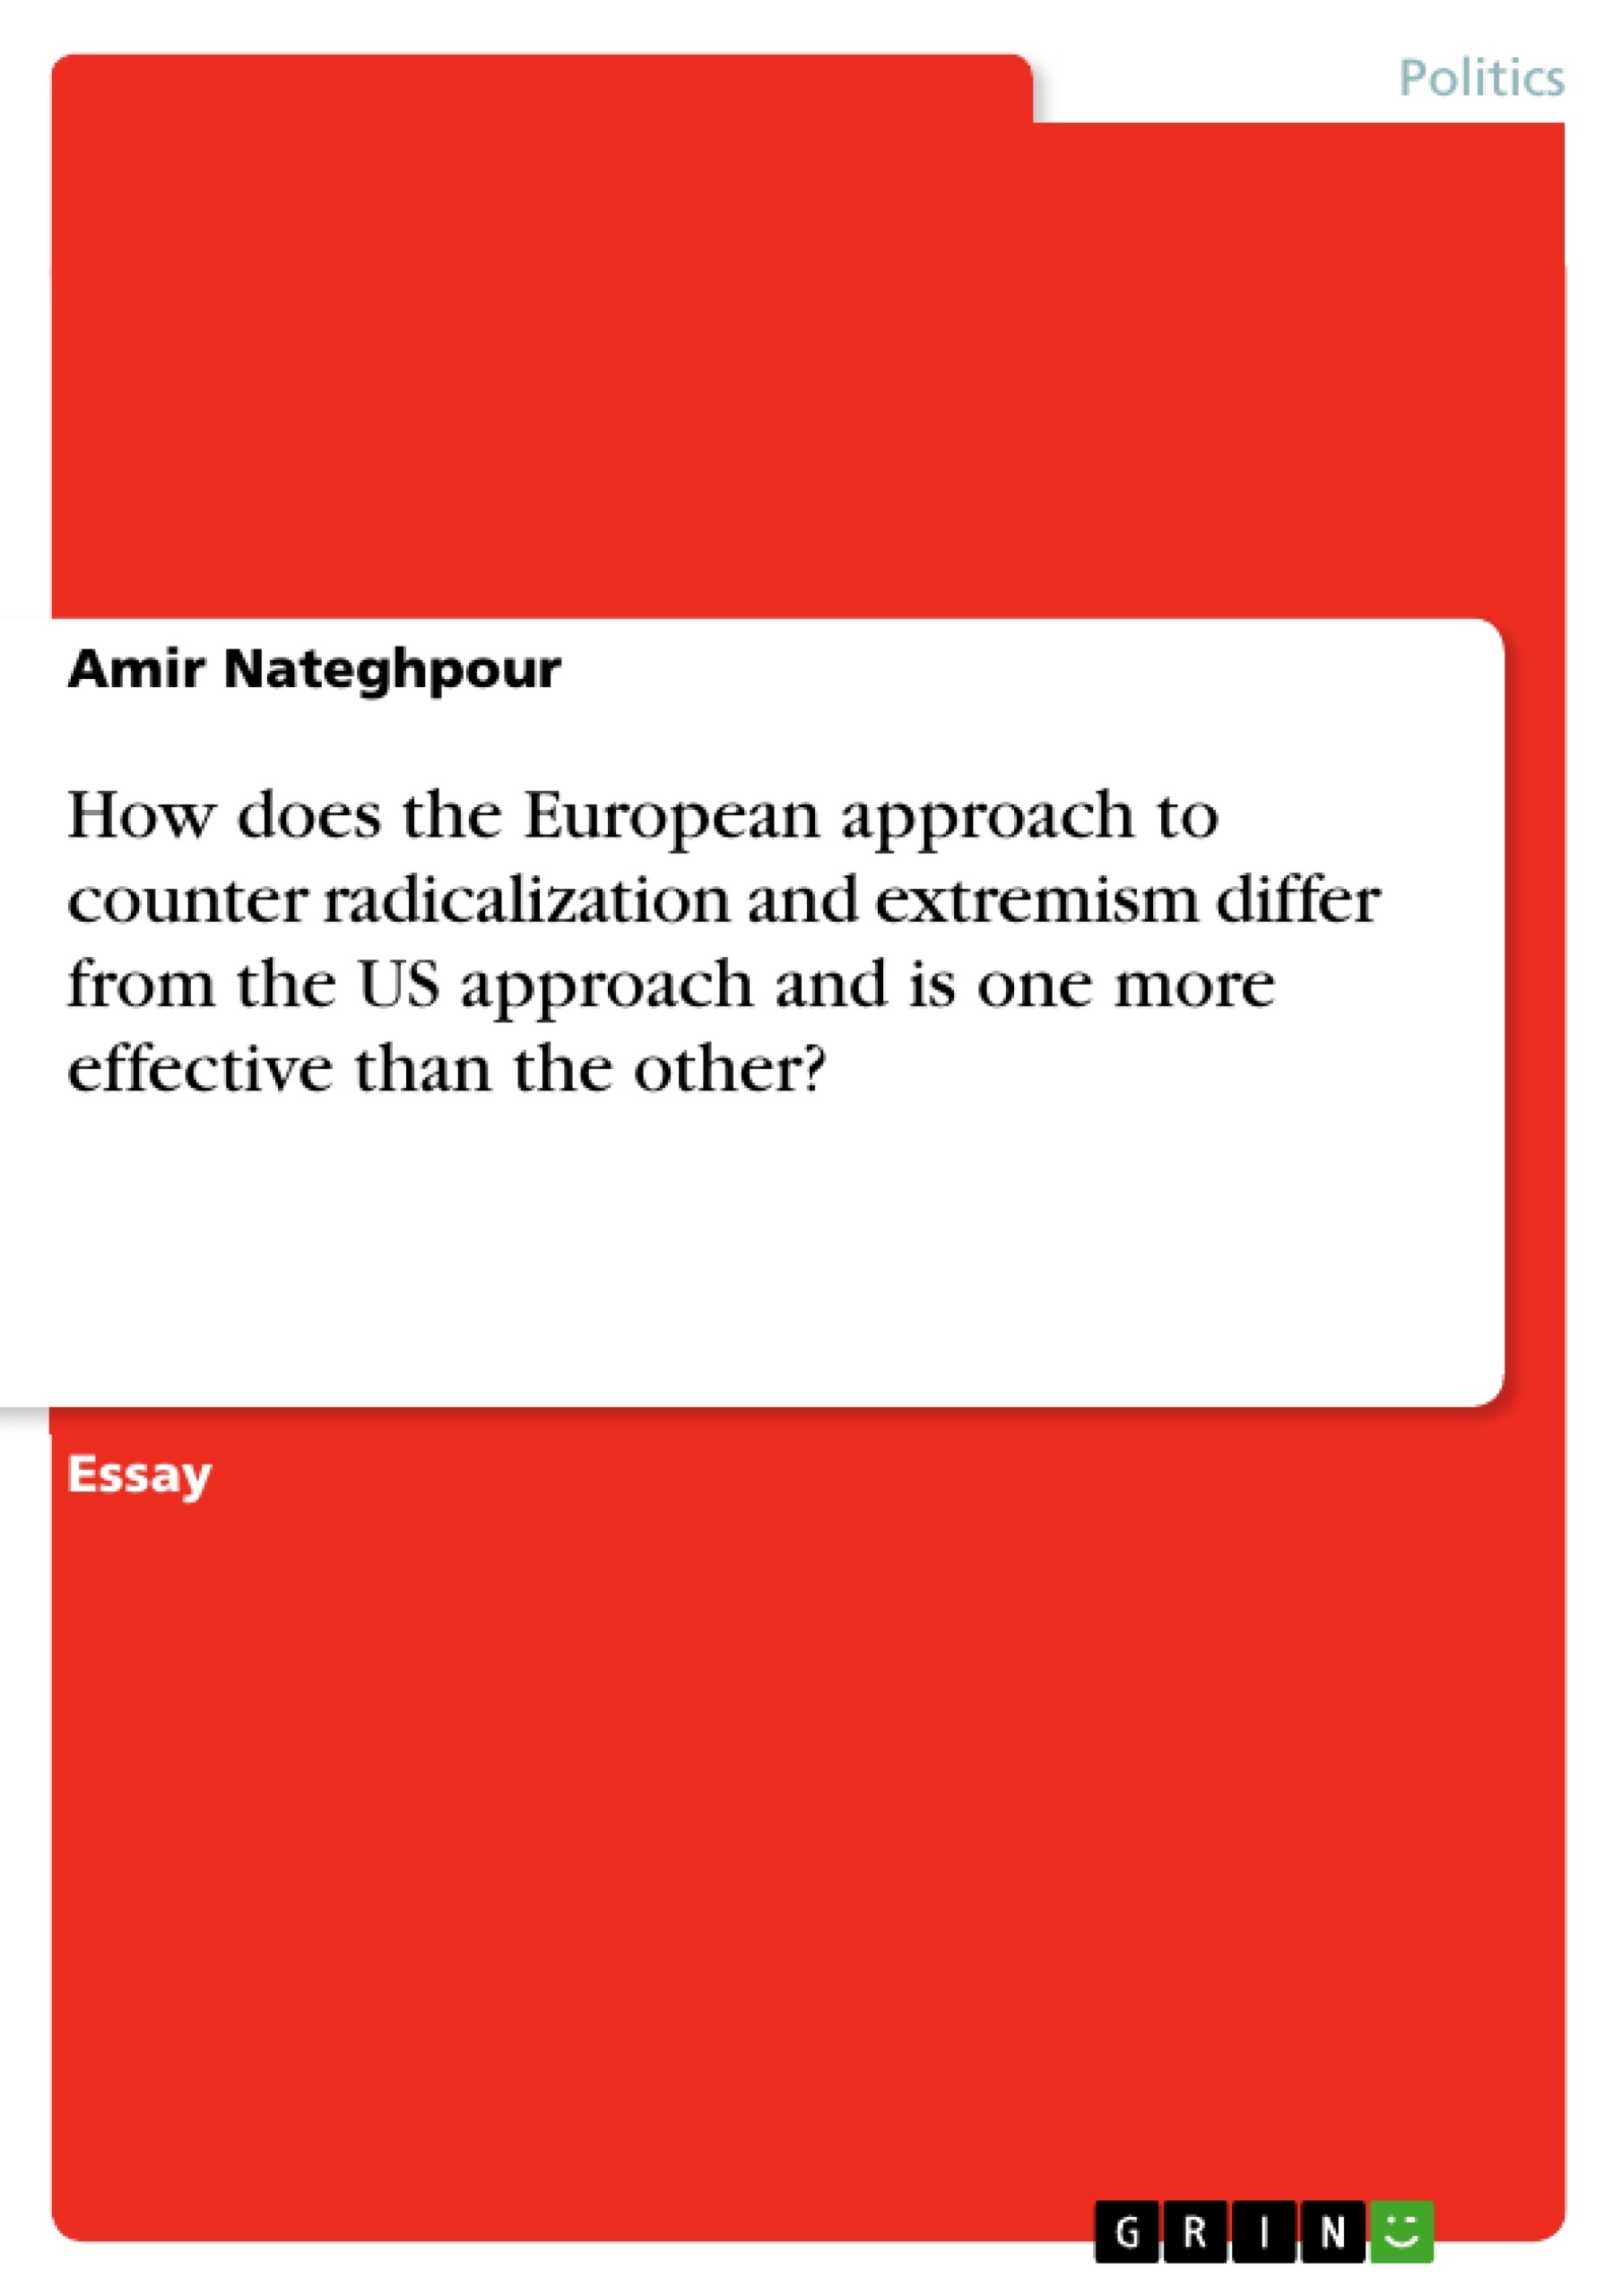 Titel: How does the European approach to counter radicalization and extremism differ from the US approach and is one more effective than the other?